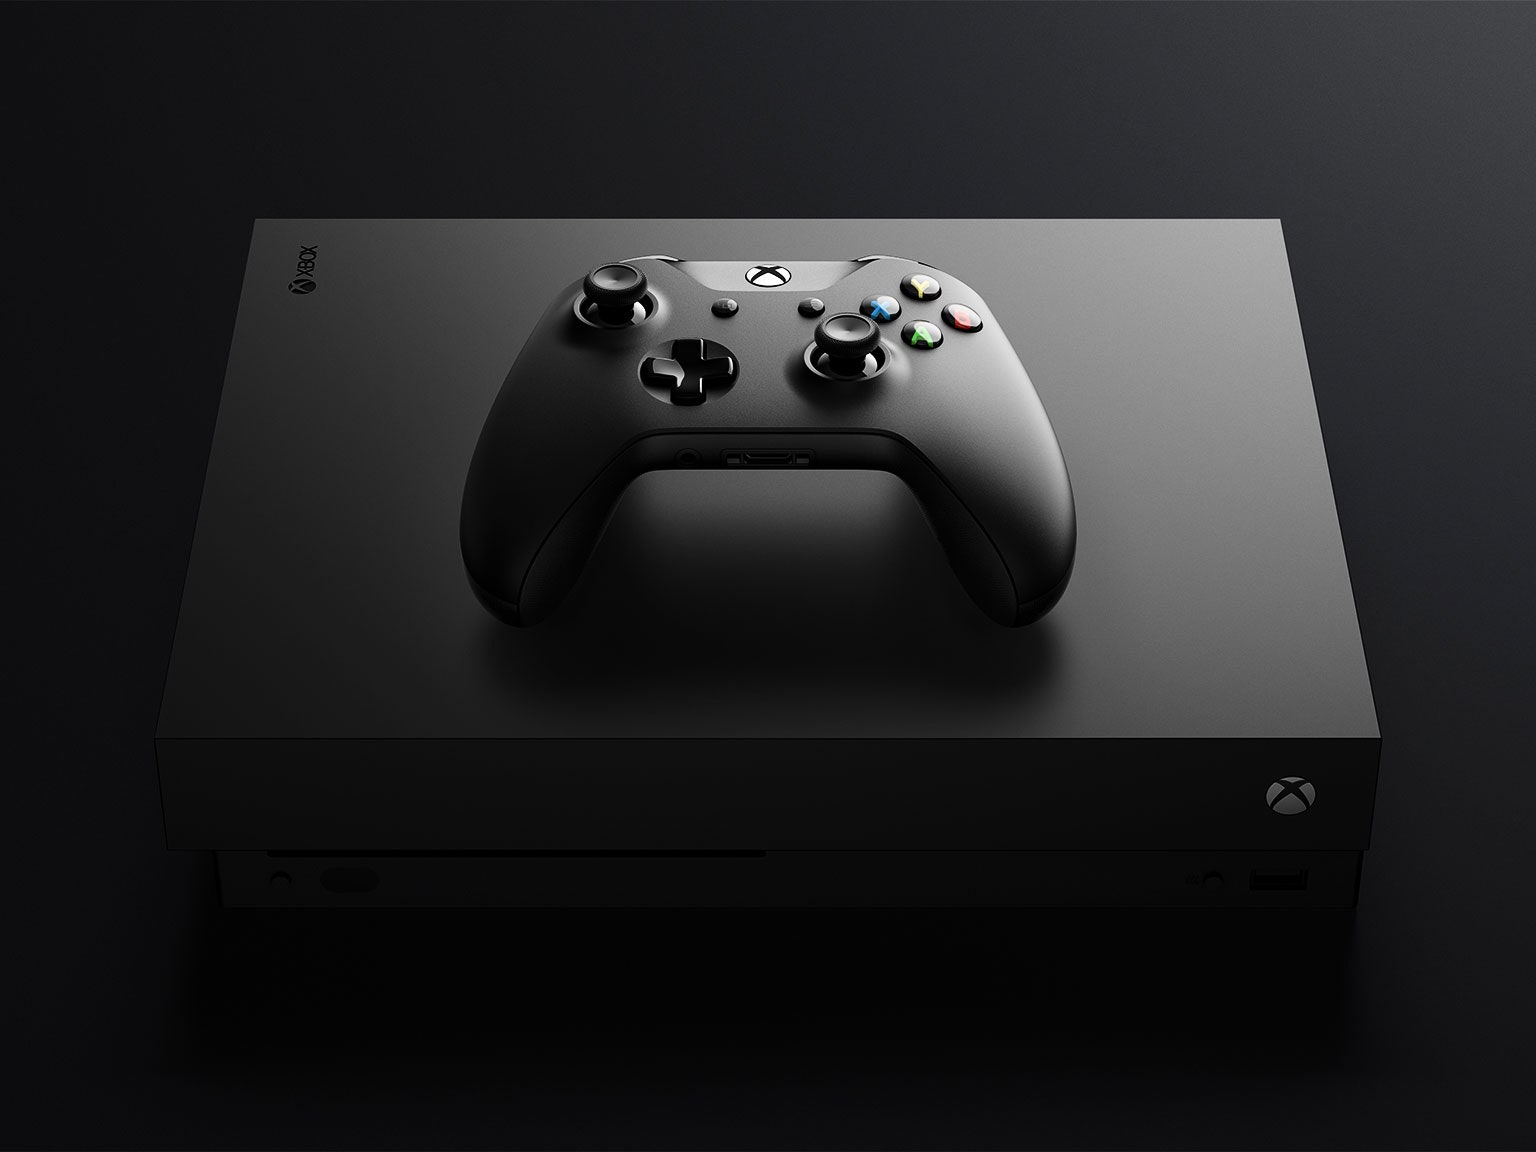 How to gameshare on an Xbox One | Digital Trends